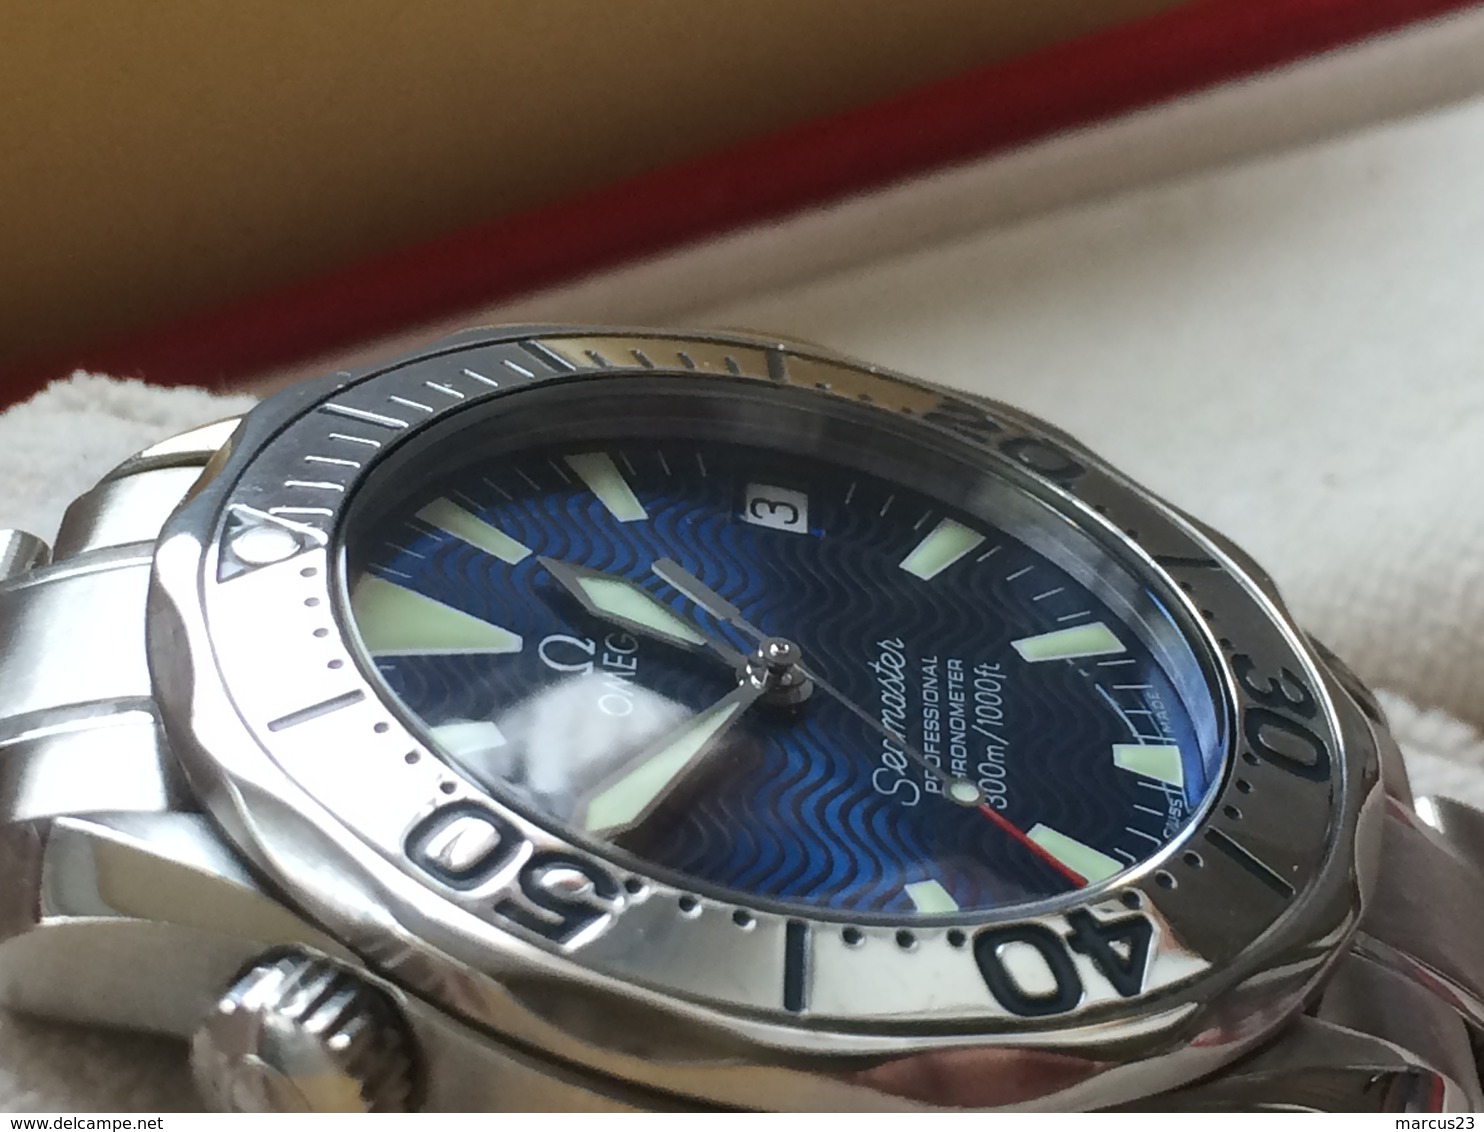 OMEGA SEAMASTER 300M PROFESSIONAL CHRONOMETRE, AUTOMATIC MID SIZE NEW DEMO MODEL - Watches: Top-of-the-Line